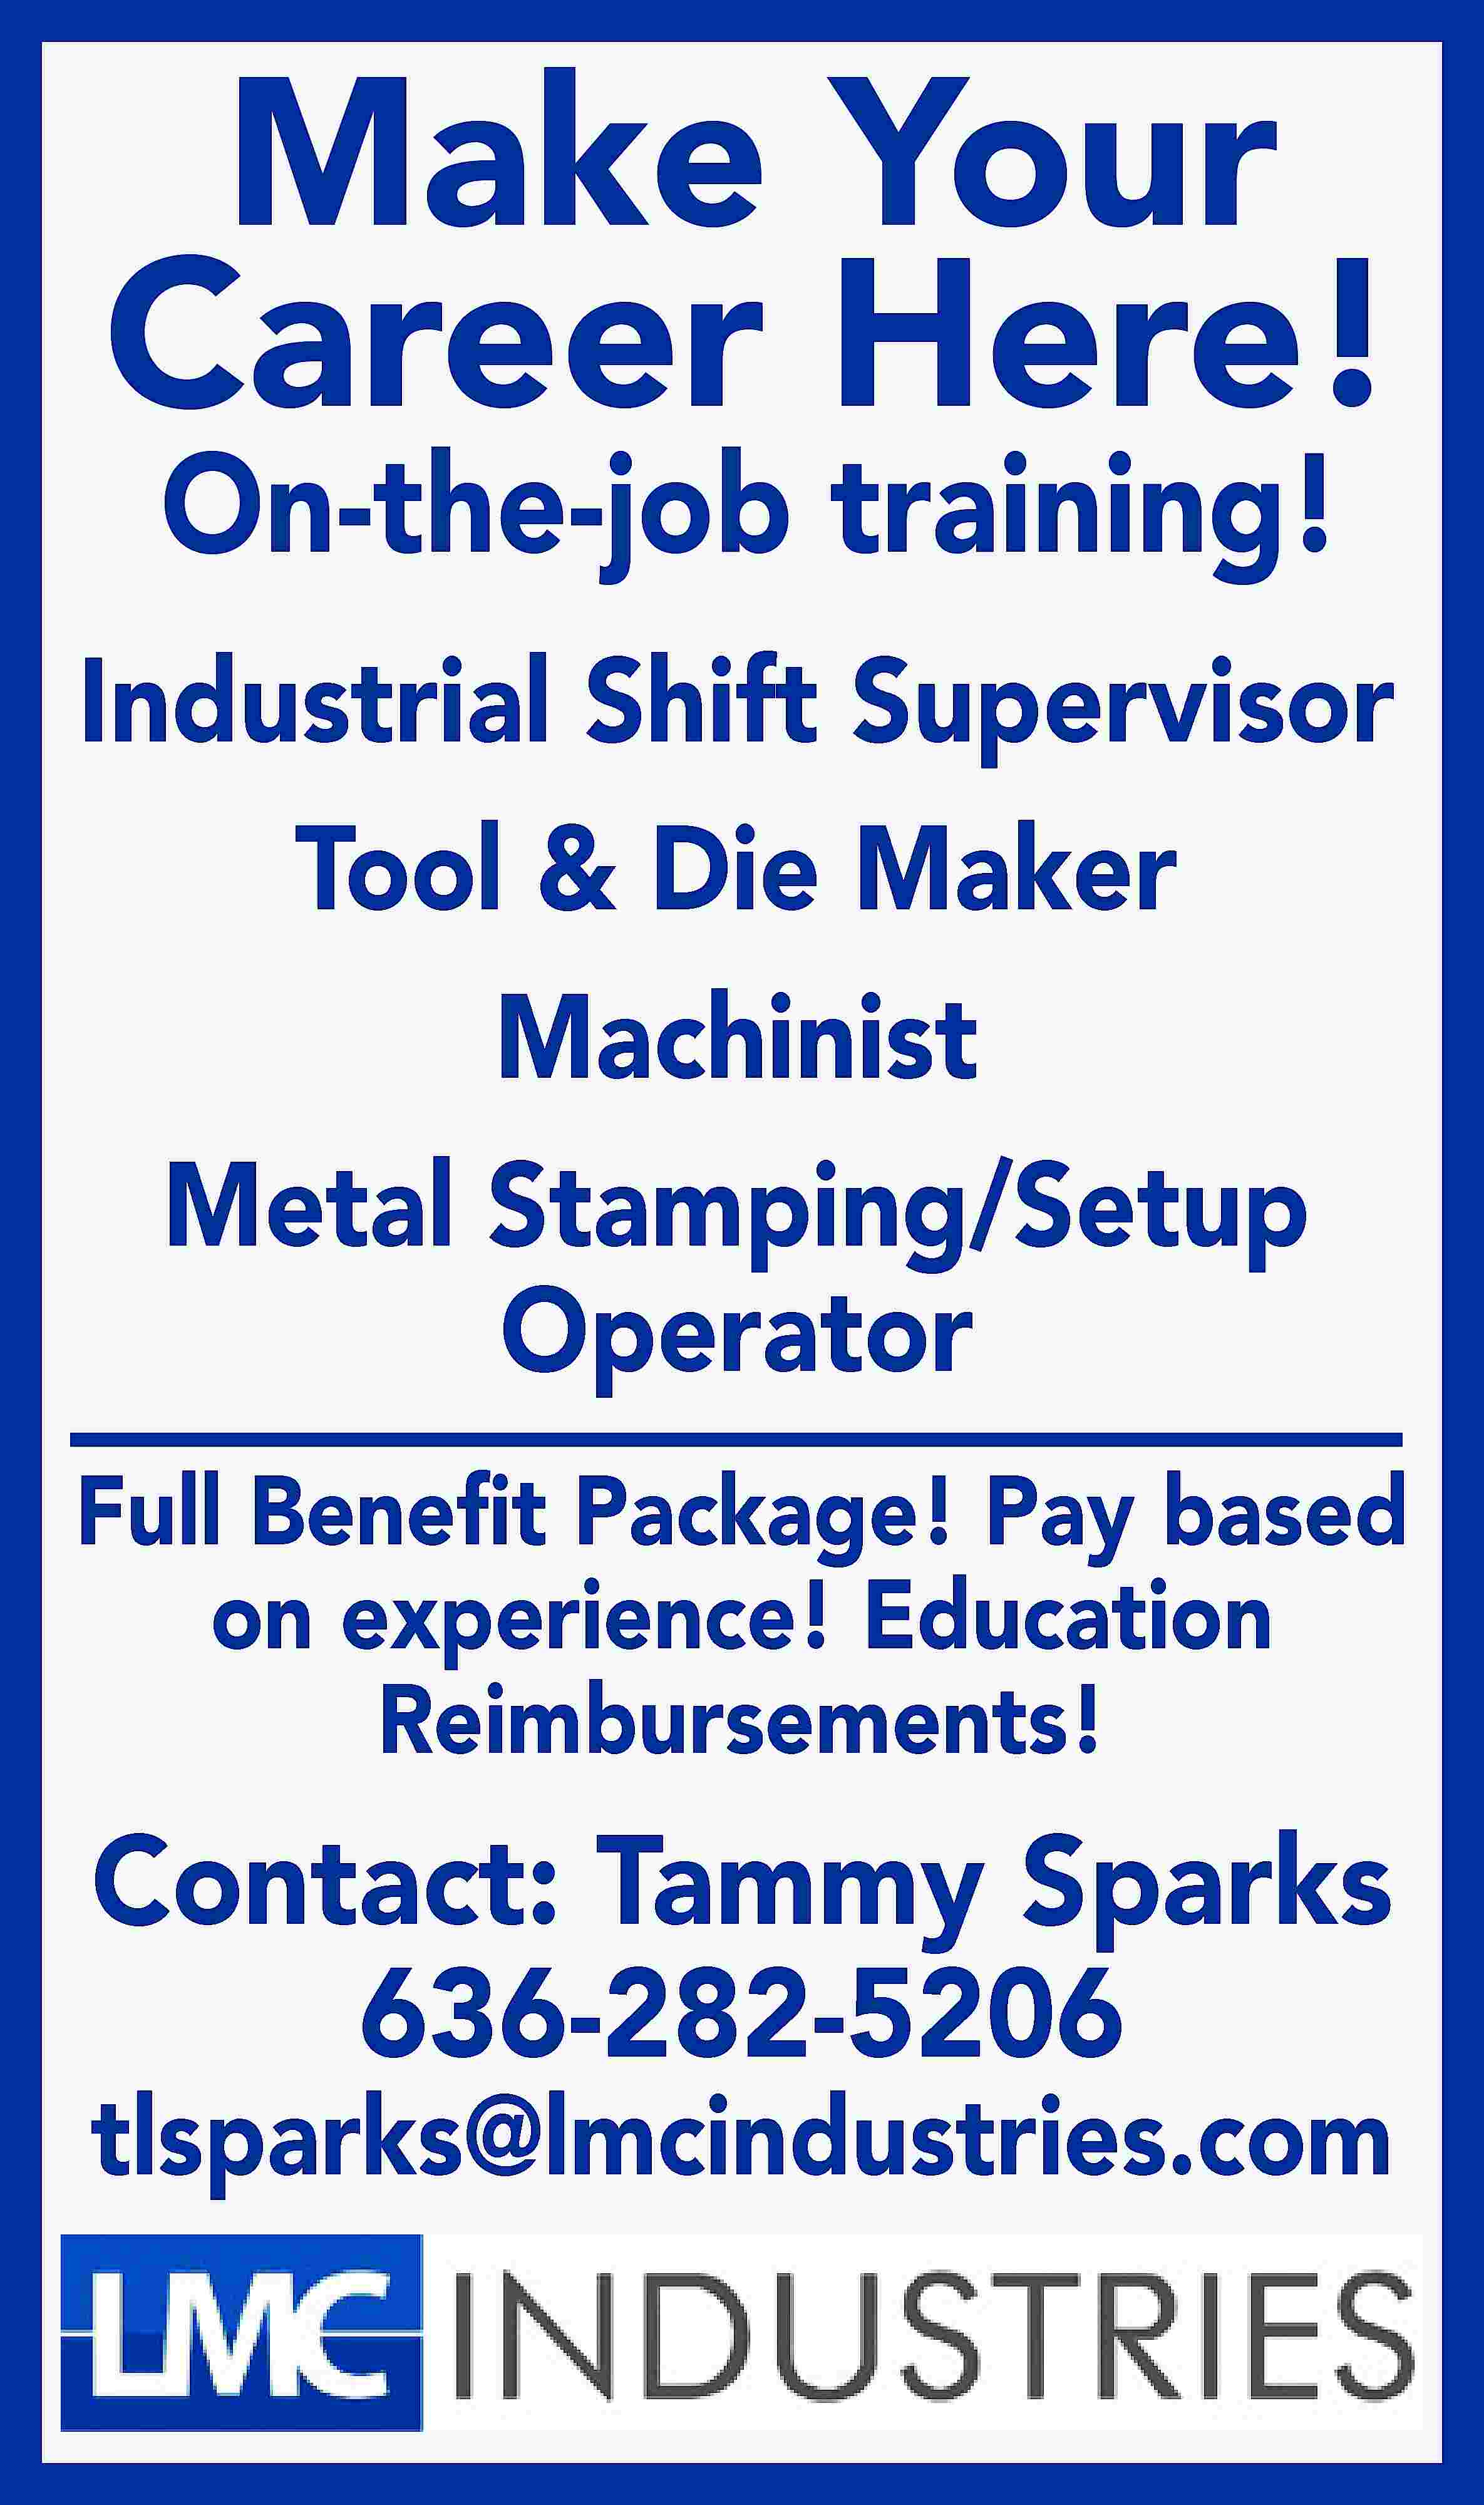 Make Your Career Here! On-the-job  Make Your Career Here! On-the-job training! Industrial Shift Supervisor Tool & Die Maker Machinist Metal Stamping/Setup Operator Full Beneﬁt Package! Pay based on experience! Education Reimbursements! Contact: Tammy Sparks 636-282-5206 tlsparks@lmcindustries.com